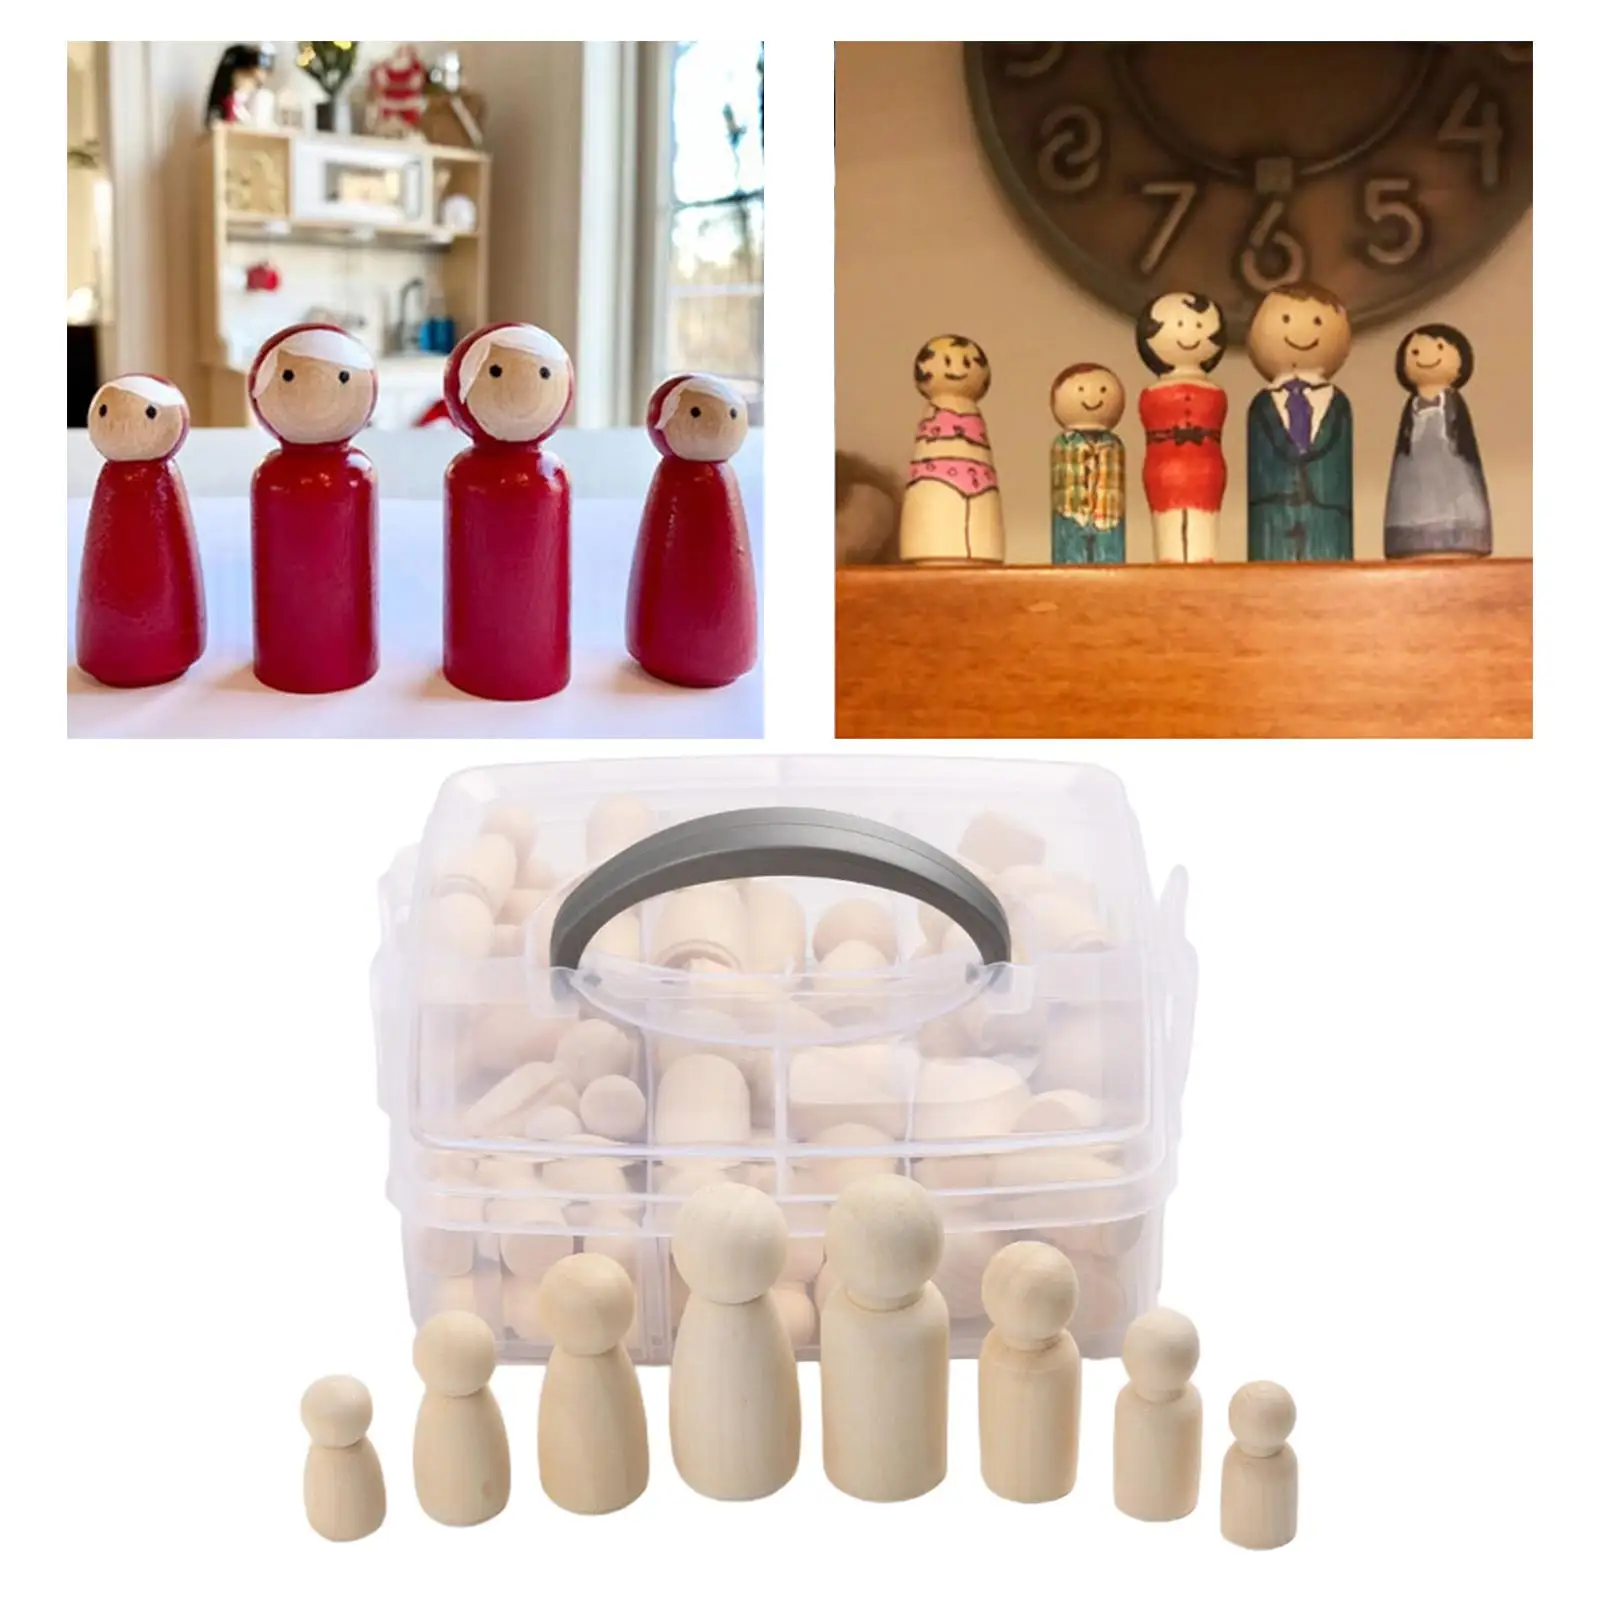 50pcs/set Smooth Blank Peg Doll People Shapes Wooden DIY Figures Ornament Crafting Making Dolls with Storage Case 